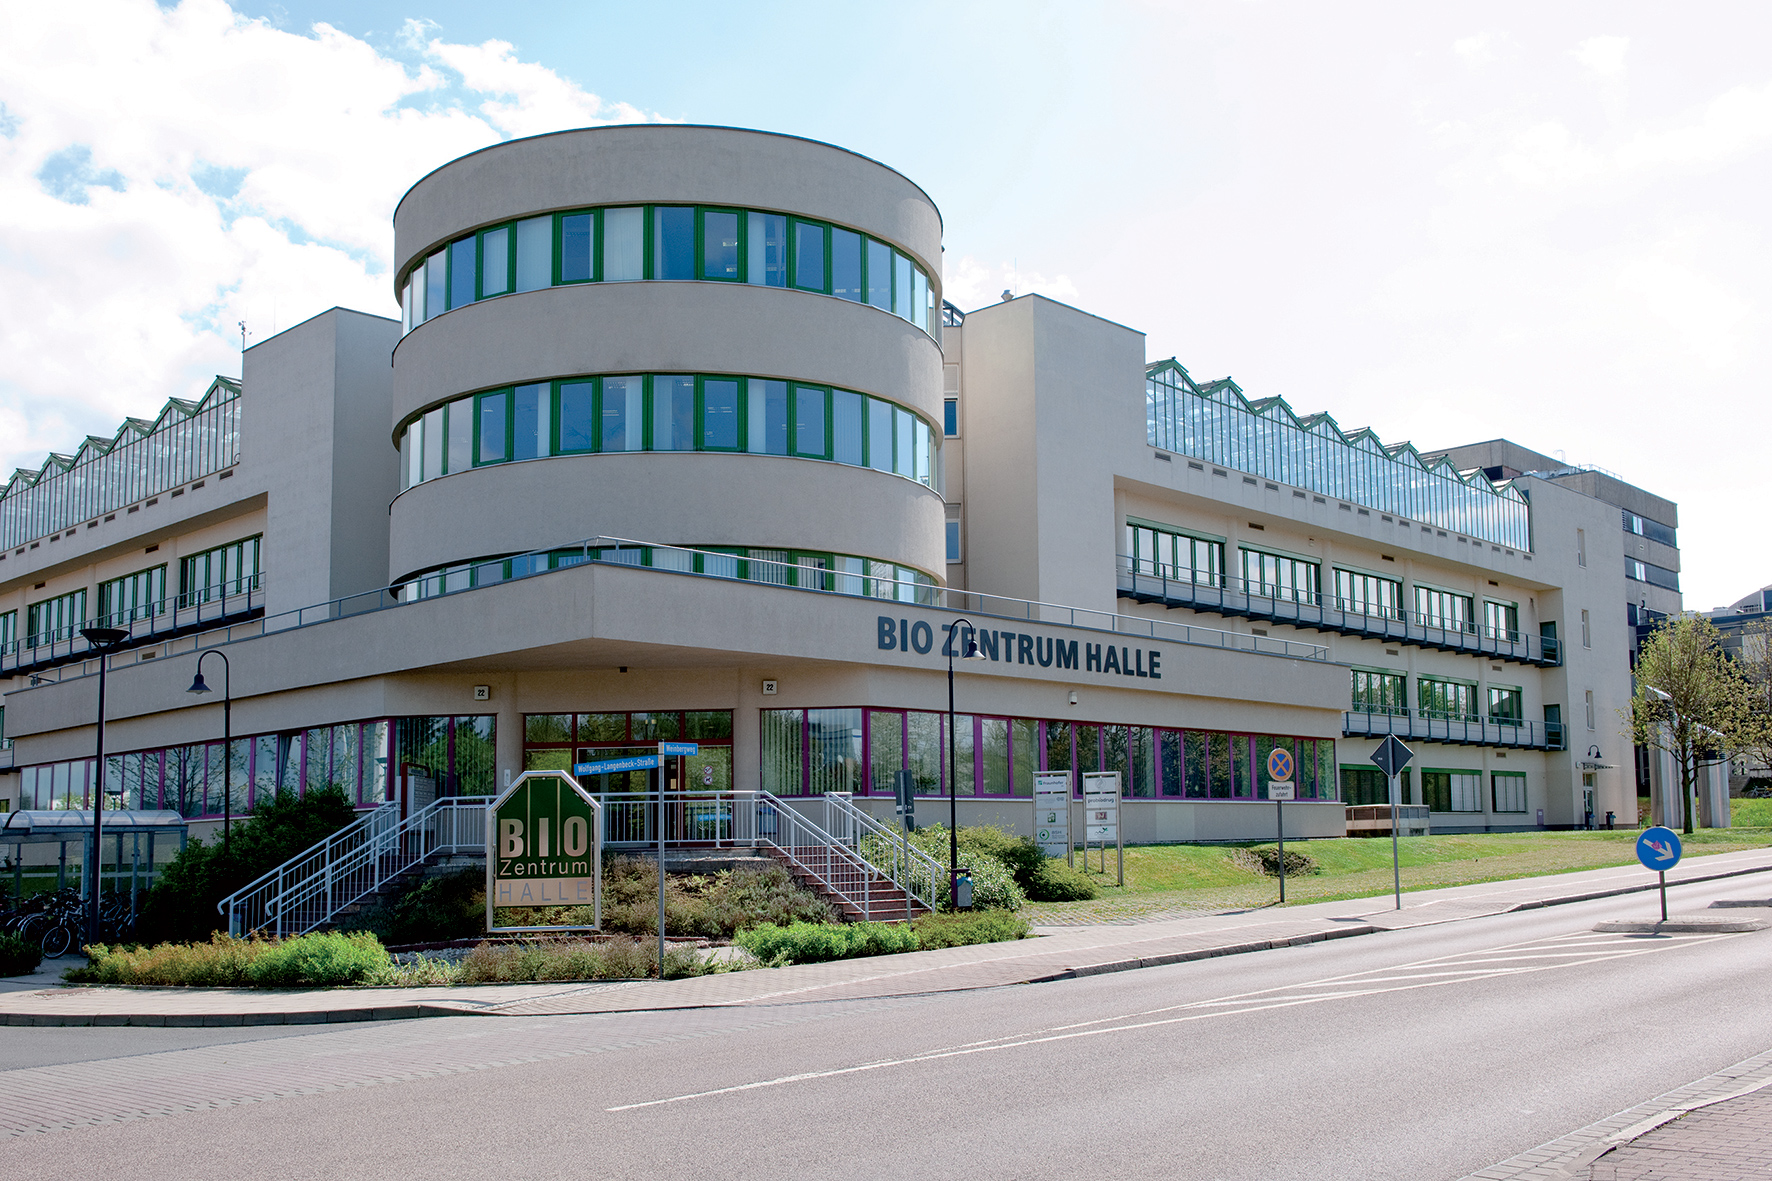 Location Halle (Saale), Germany - Exterior view